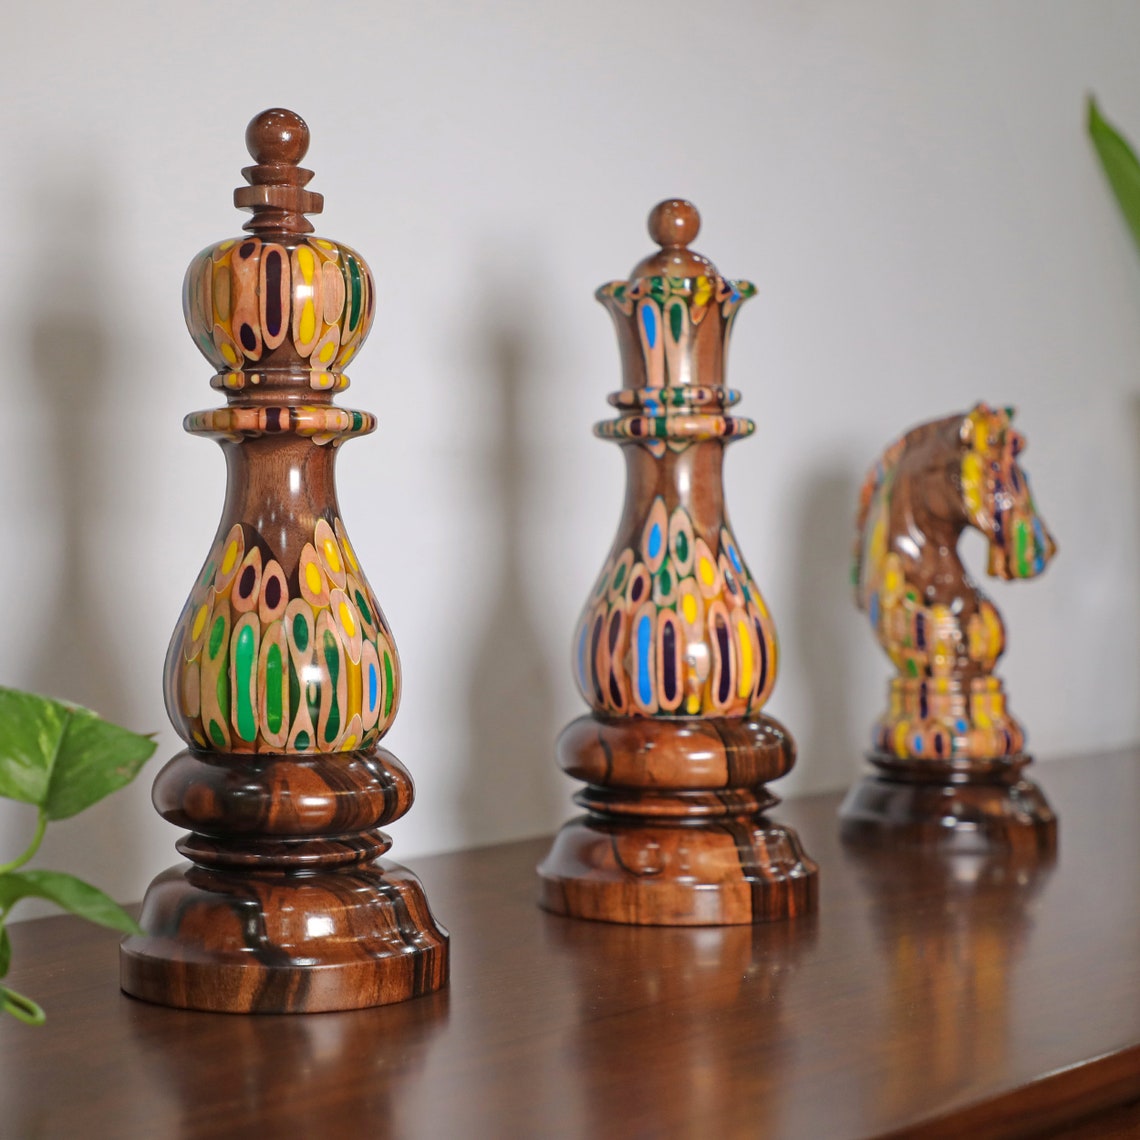 Giant Ornamental Pawn - Deluxe Serial of Chess Piece for Decor